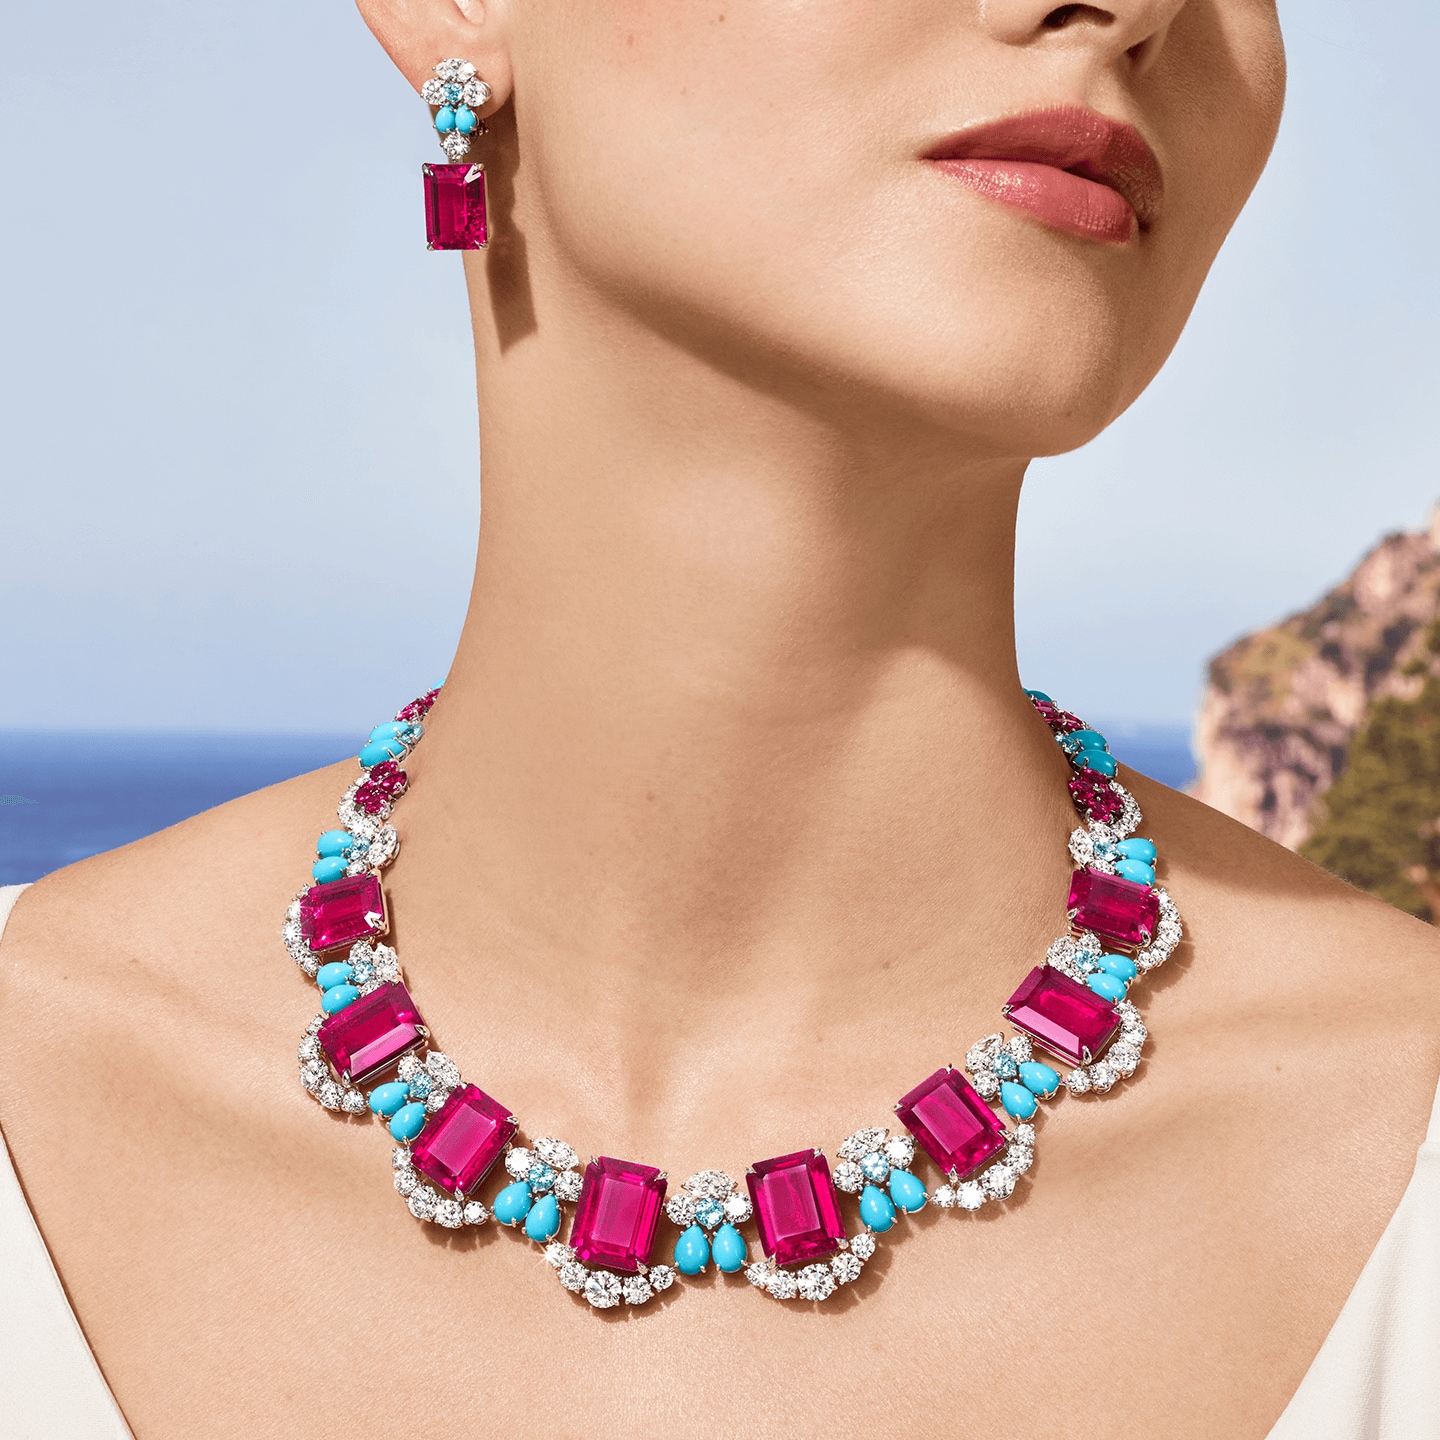 A female wearing the Amalfi Necklace with ocean on the background